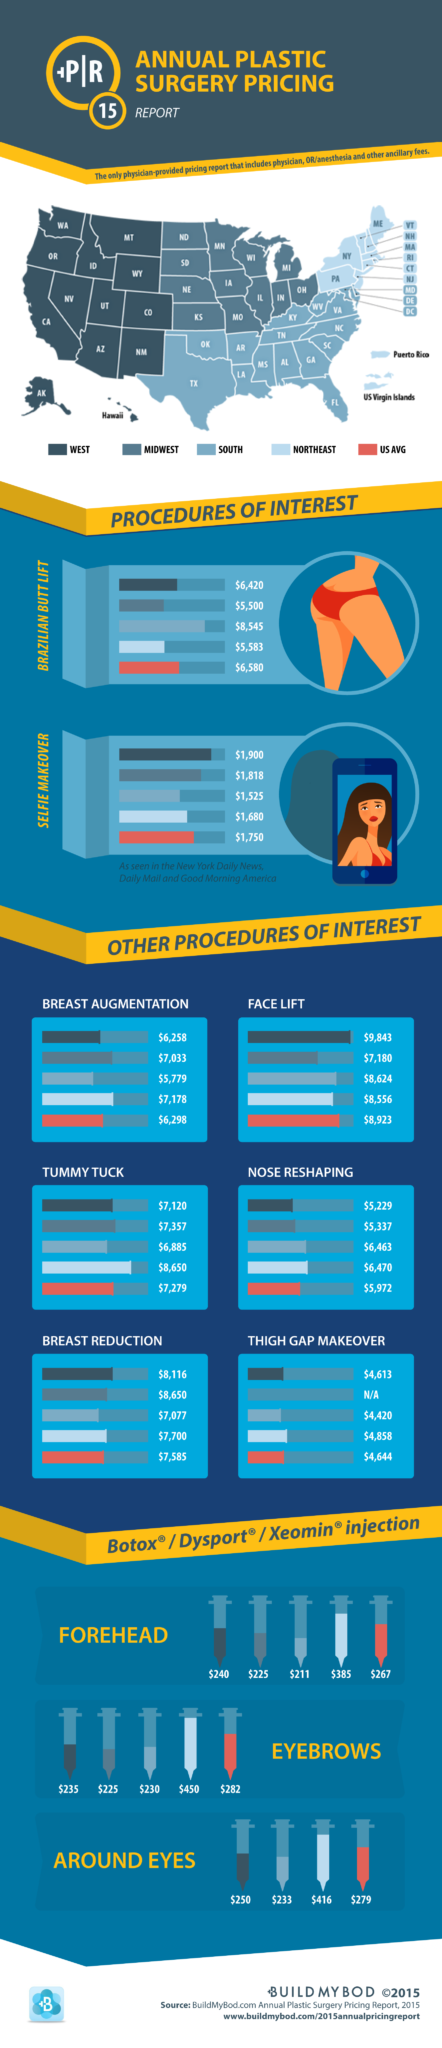 2015-buildmybod-annual-pricing-report-infographic-High-Res